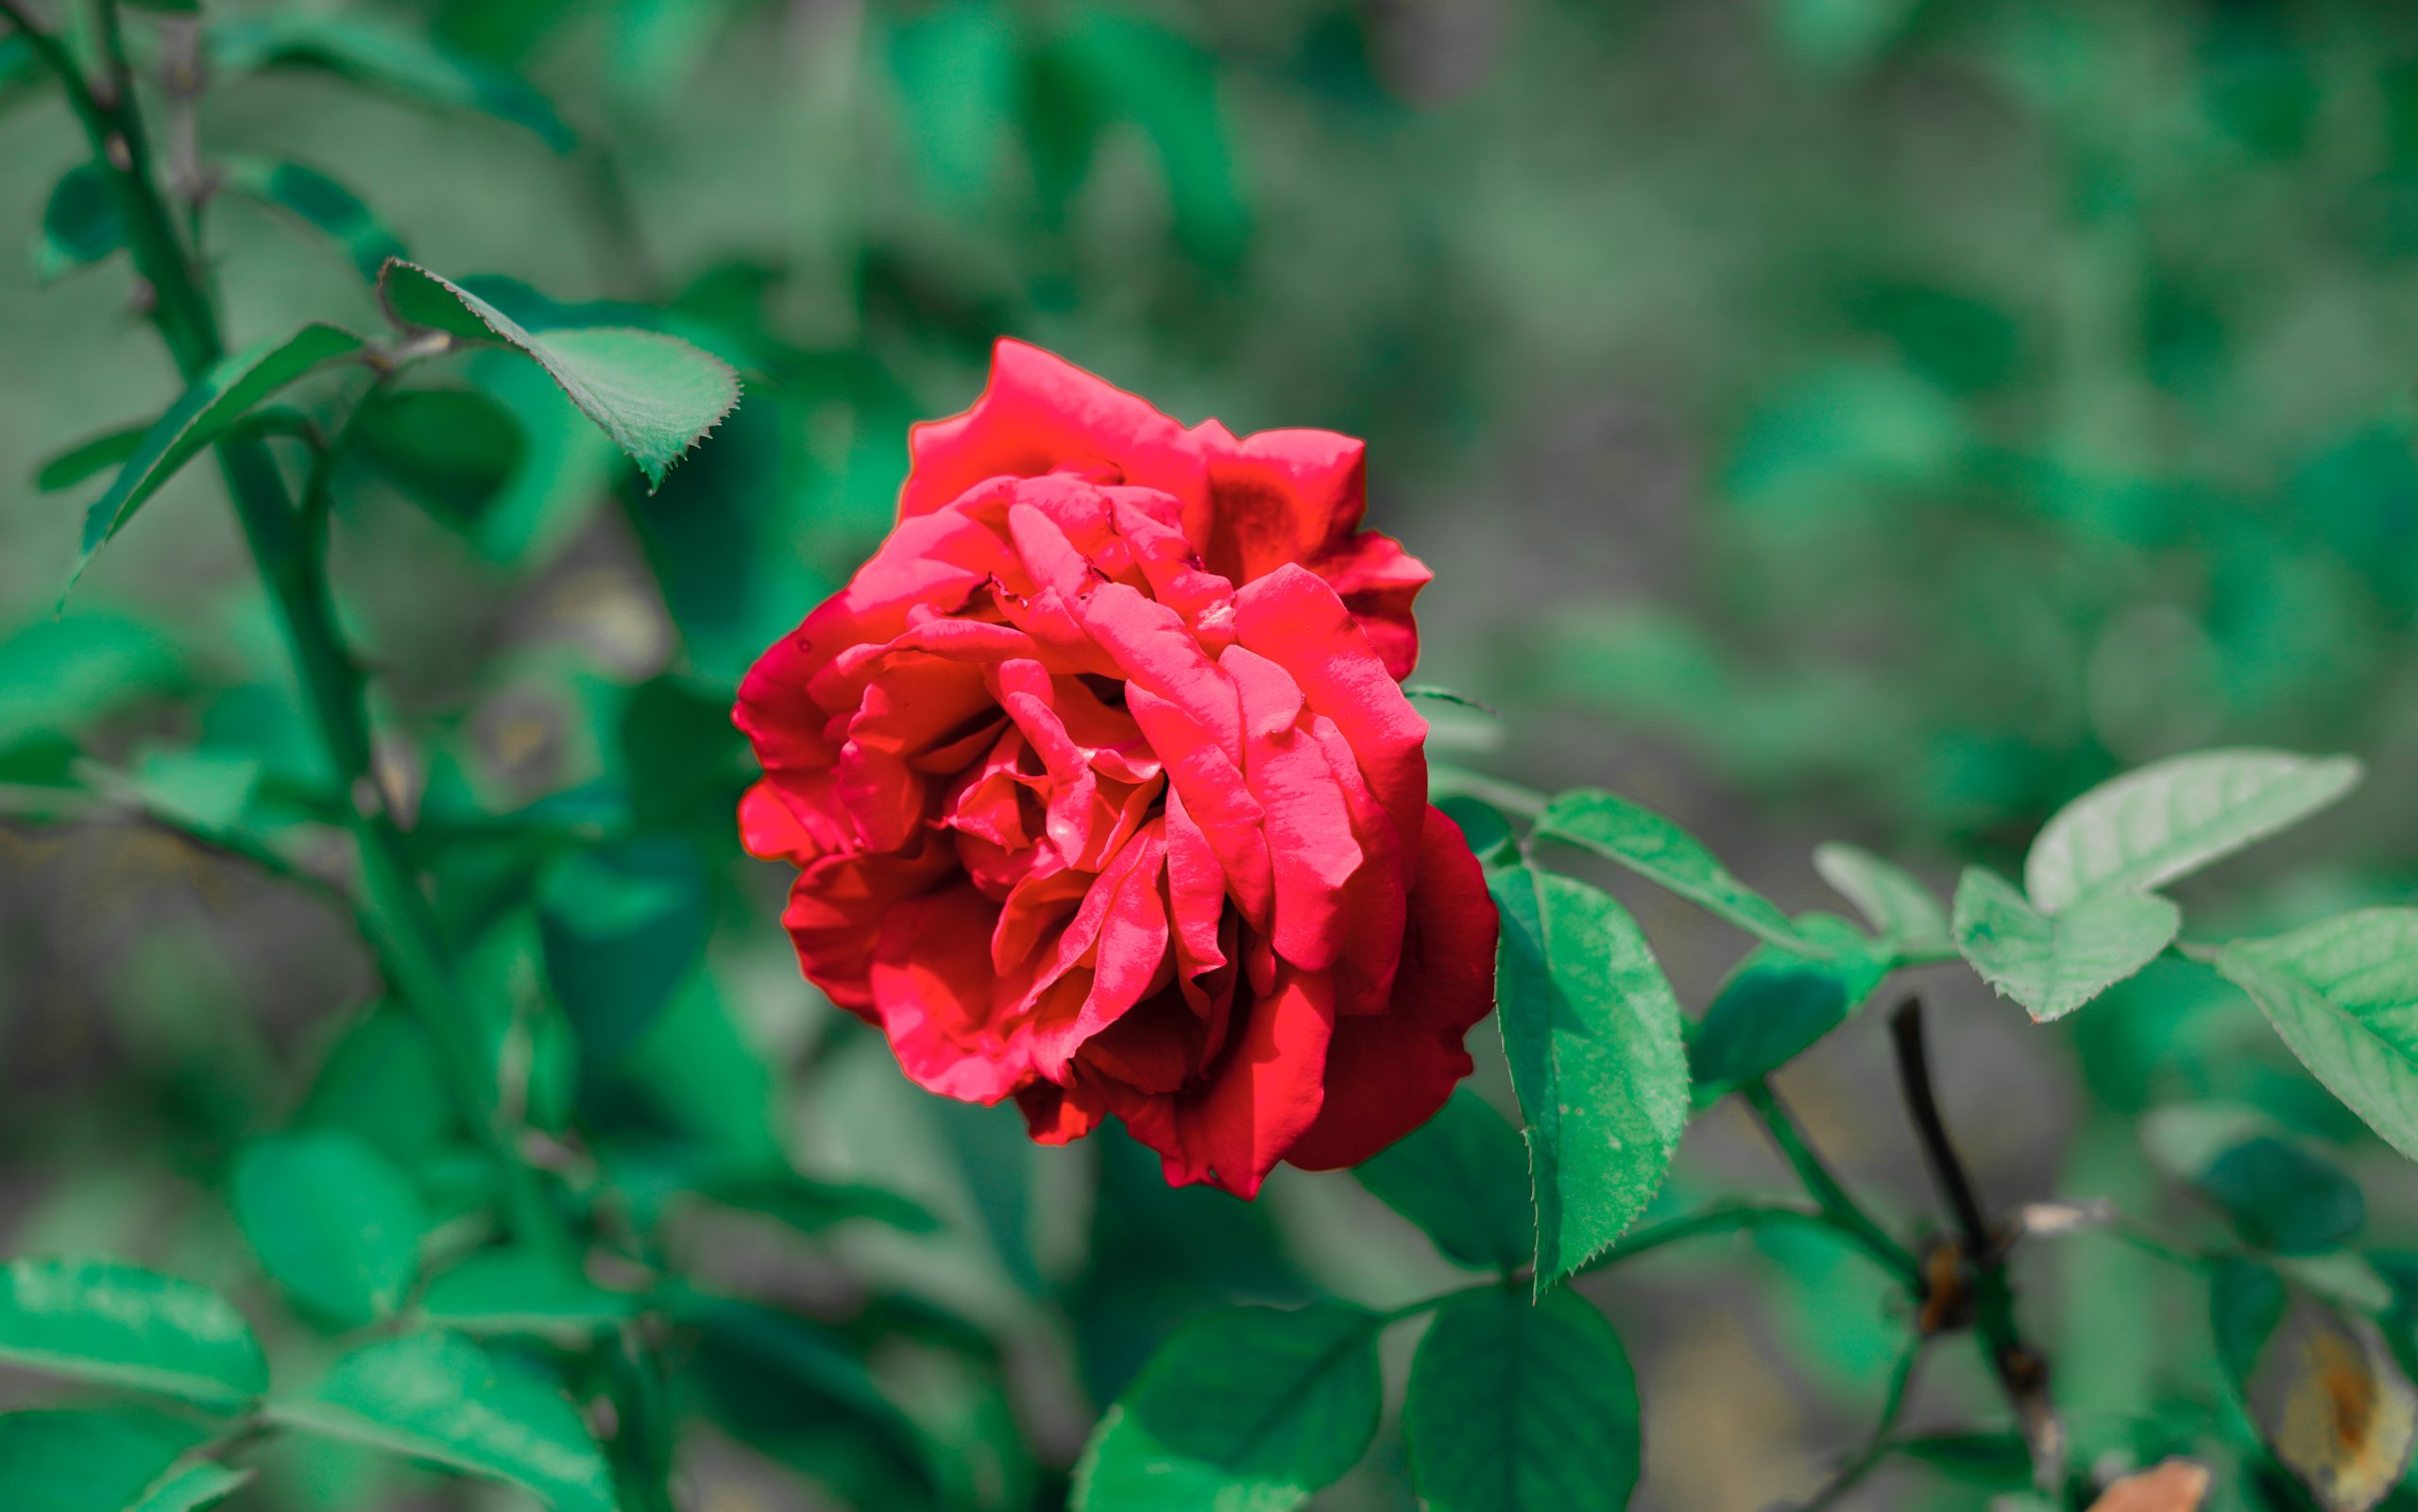 A red rose plant